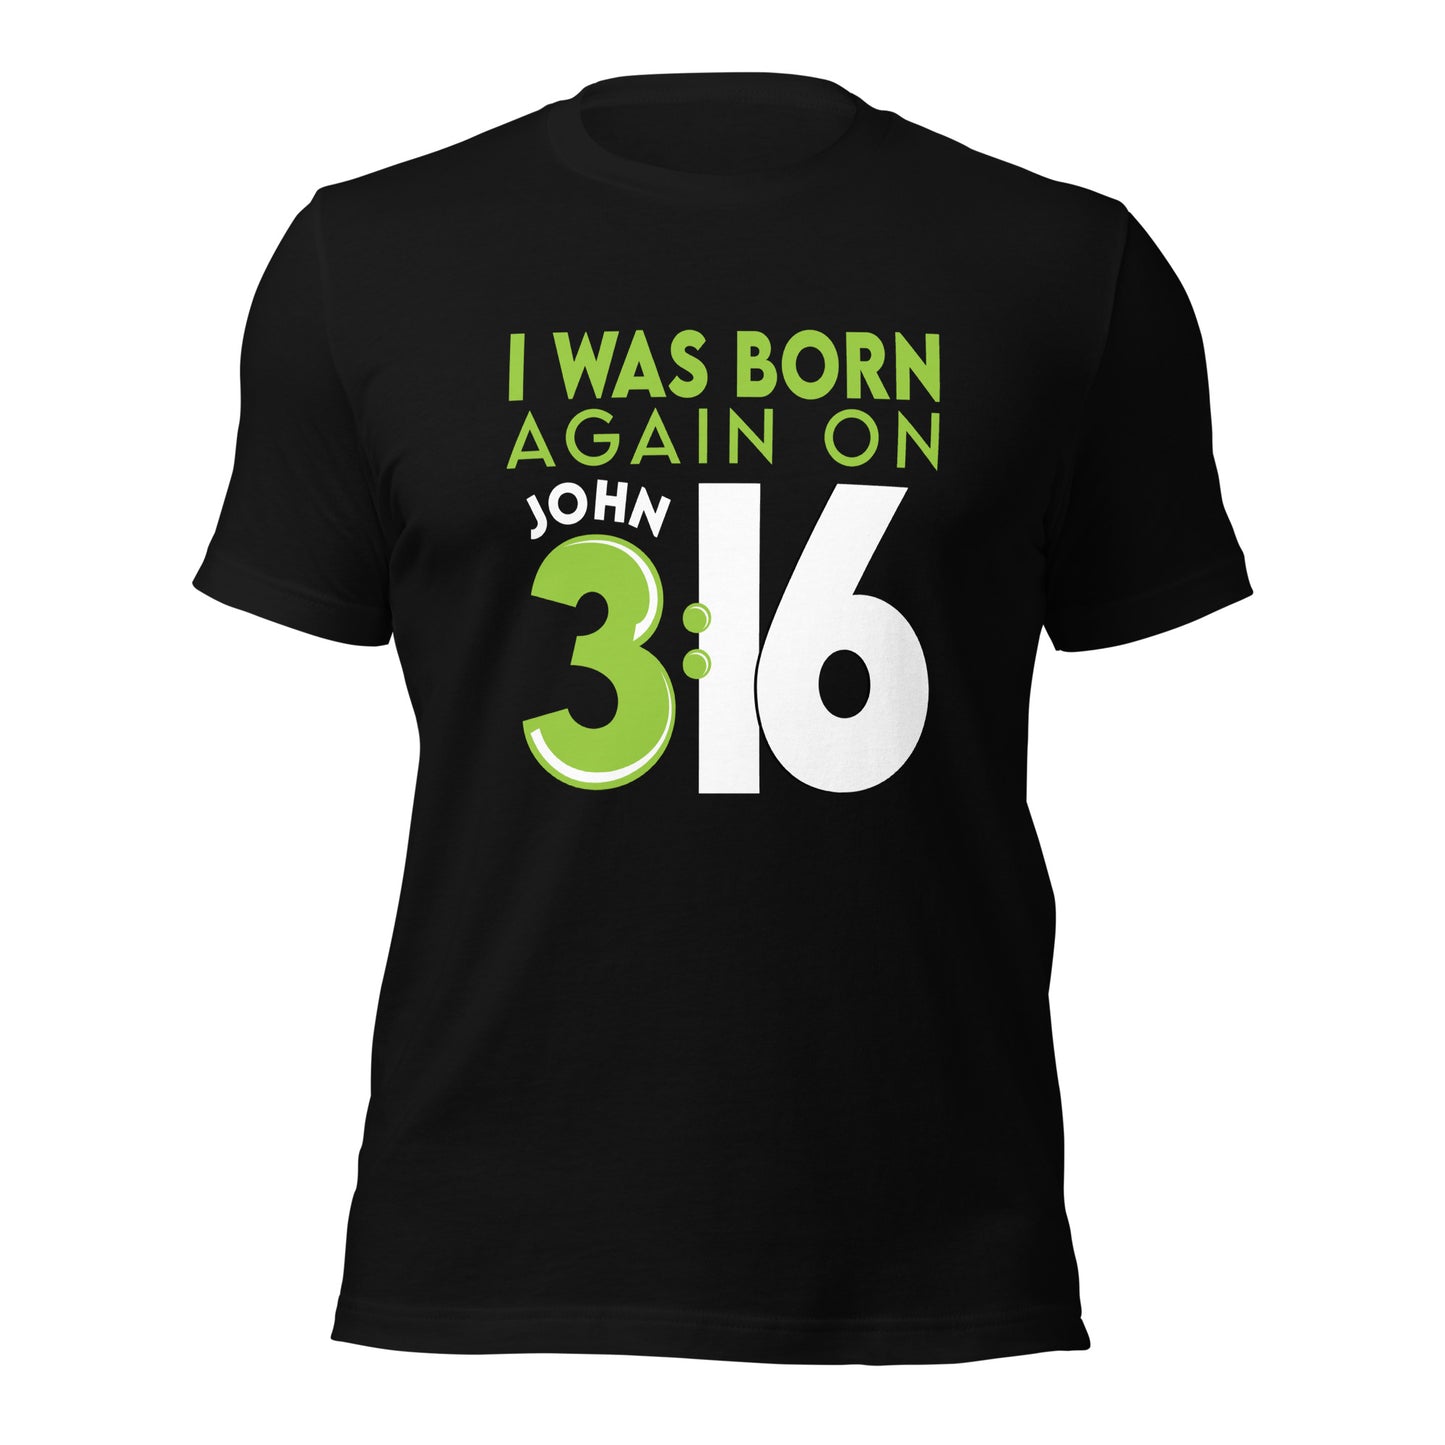 Black Christian aesthetic unisex t-shirt with a play on words that says, I Was Born Again on John 3:16, bible verse scripture quote in lime green and white, designed for men and women